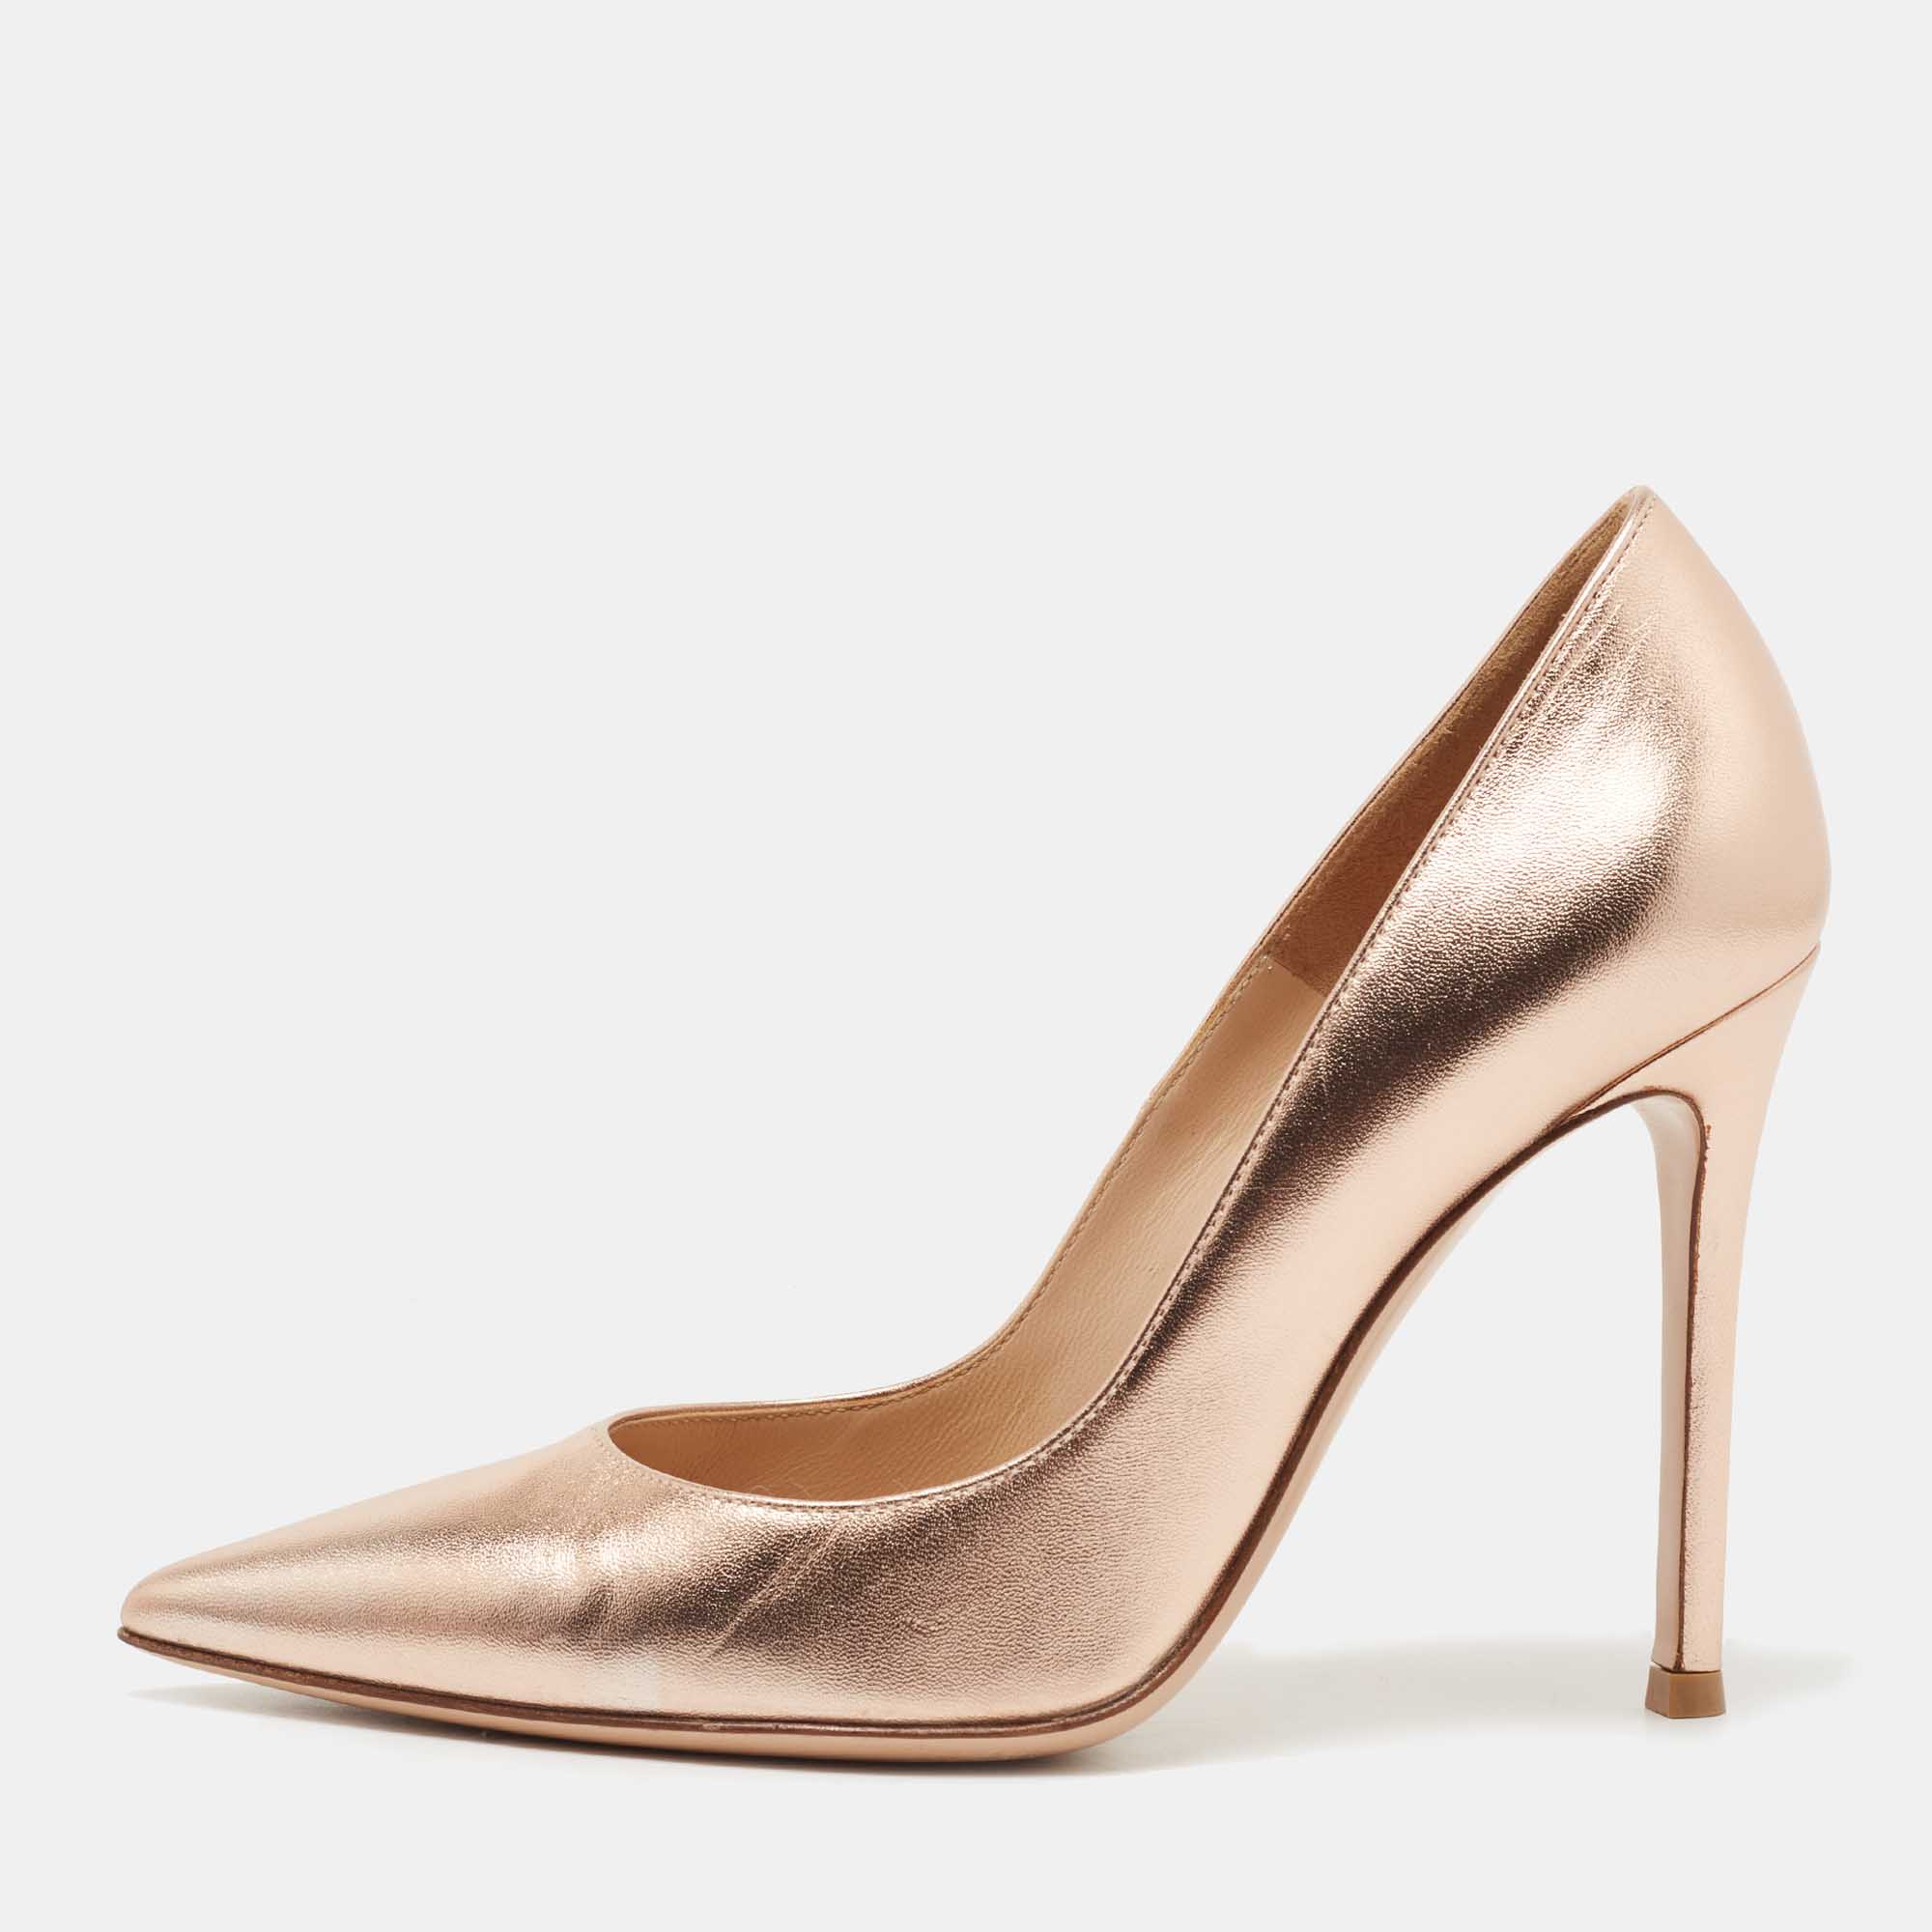 Gianvito Rossi Metallic Bronze Leather Pointed Toe Pumps Size 36